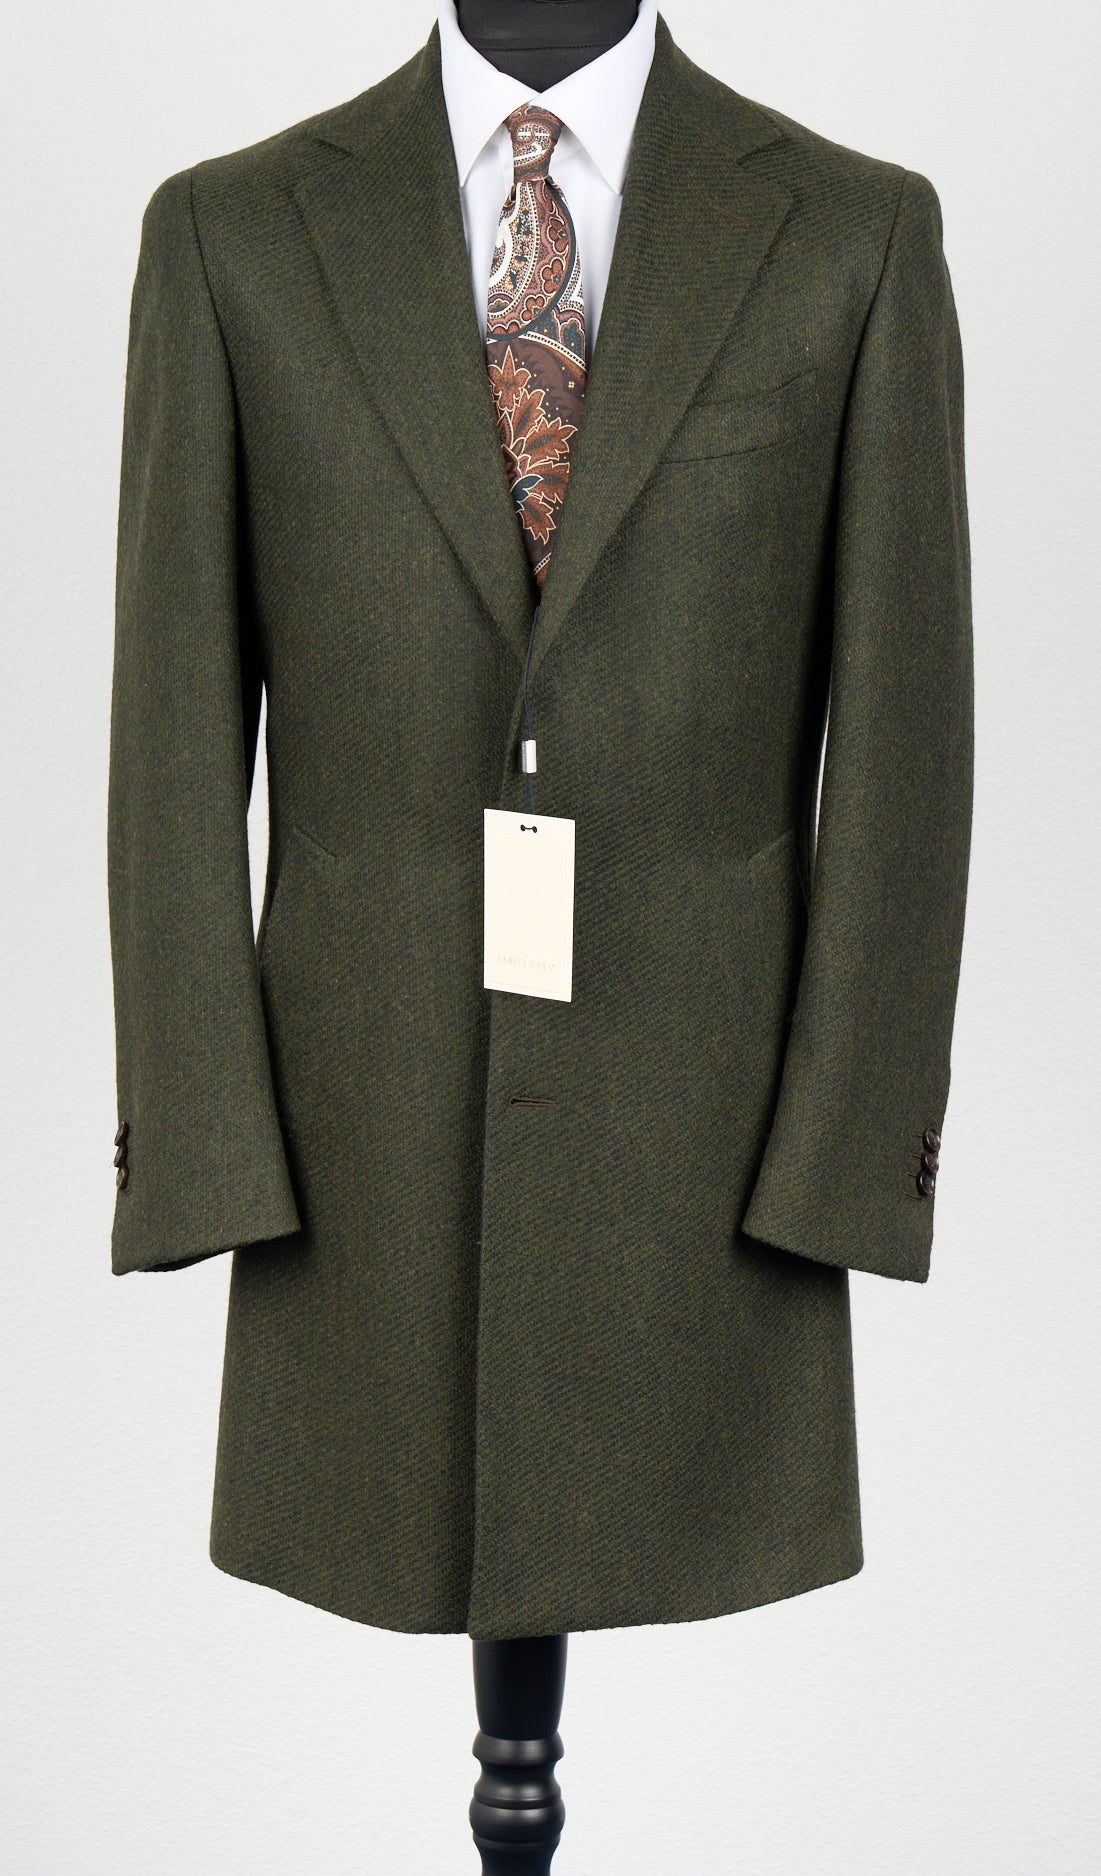 New Suitsupply Vincenza Moss Green Wool and Cashmere Coat - Size 38R